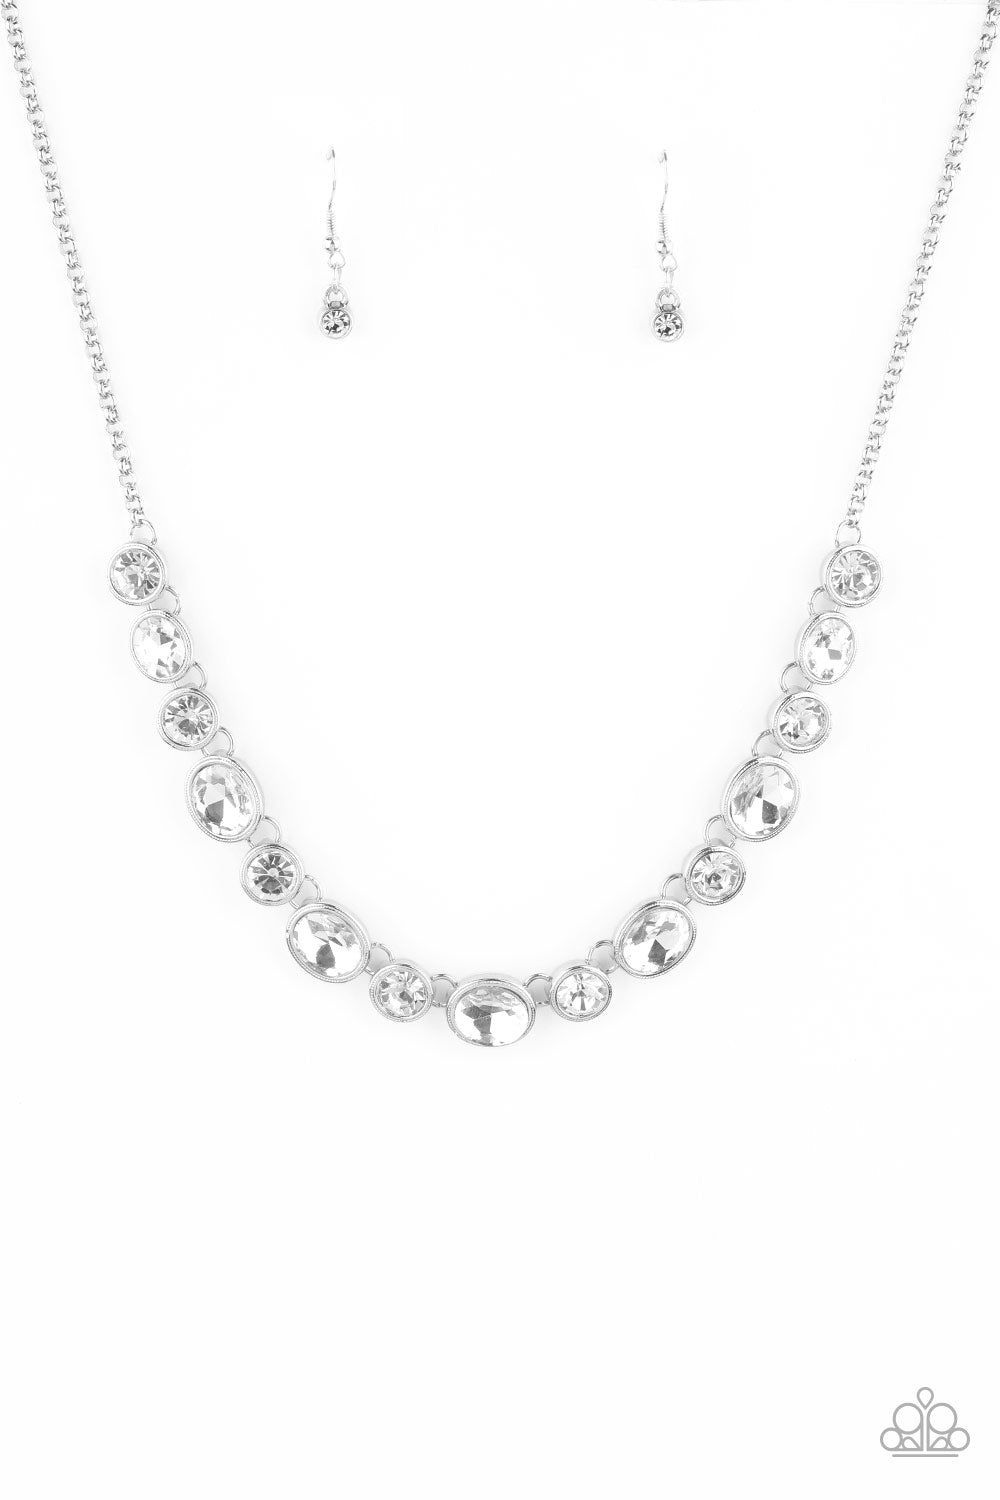 Girls Gotta Glow - White and Silver Fashion Necklace - Paparazzi Accessories -Encased in sleek silver frames, oval and round white rhinestones alternate below the collar for a timeless look. Features an adjustable clasp closure. Sold as one individual necklace.